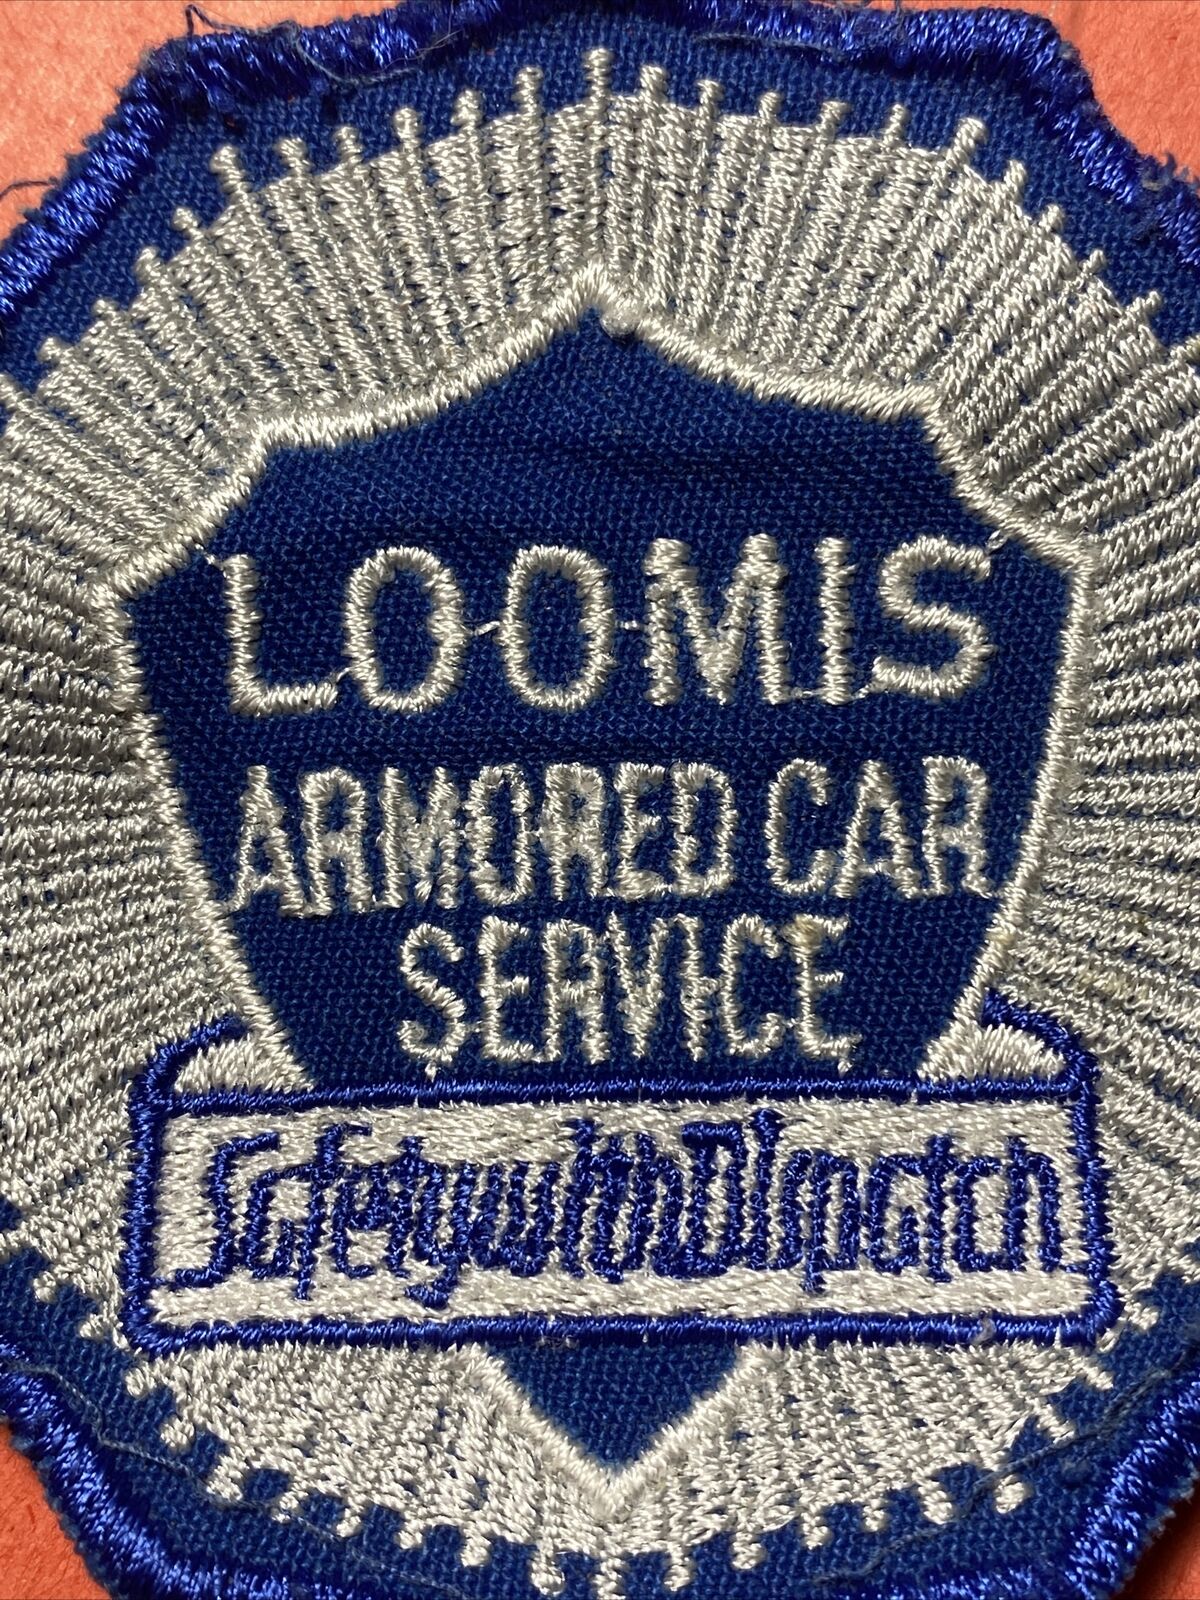 Vintage Truckers Patch. Loomis Armoured Car Service SWD 8.5cm 13 BG03